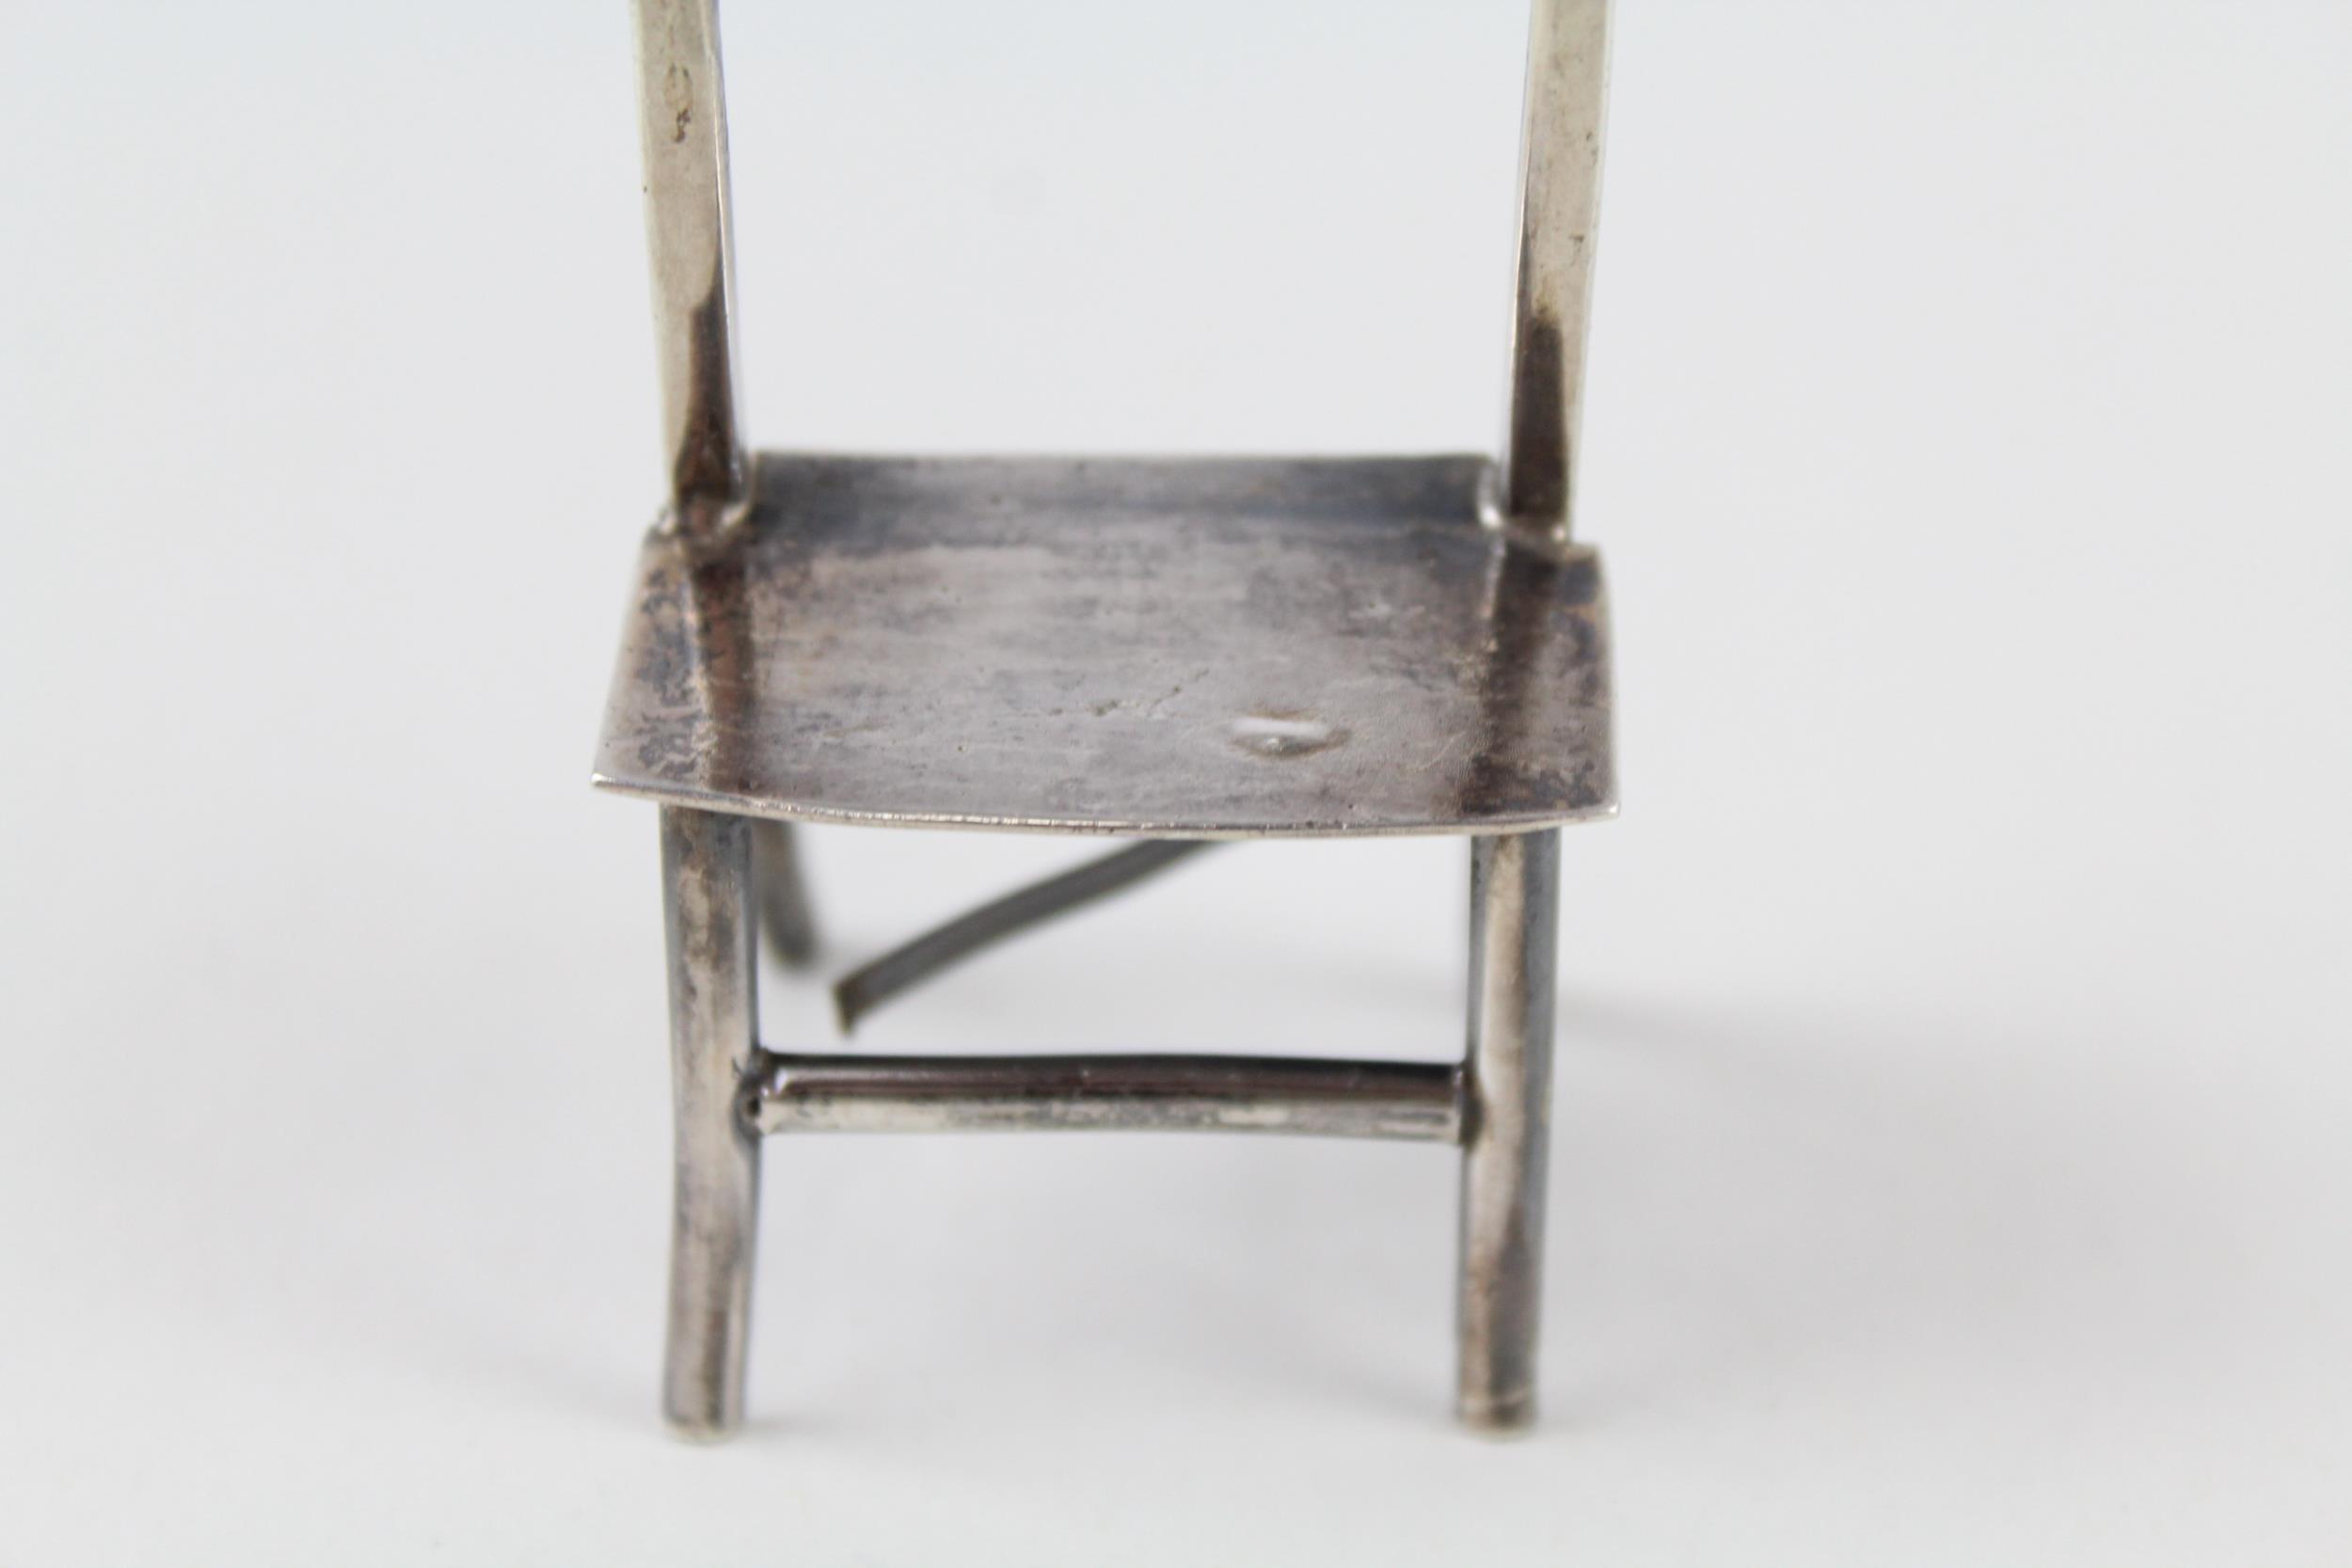 Vintage .925 Sterling Silver Art Nouveau Style Miniature Chair (30g) - XRF TESTED FOR PURITY - Image 4 of 7